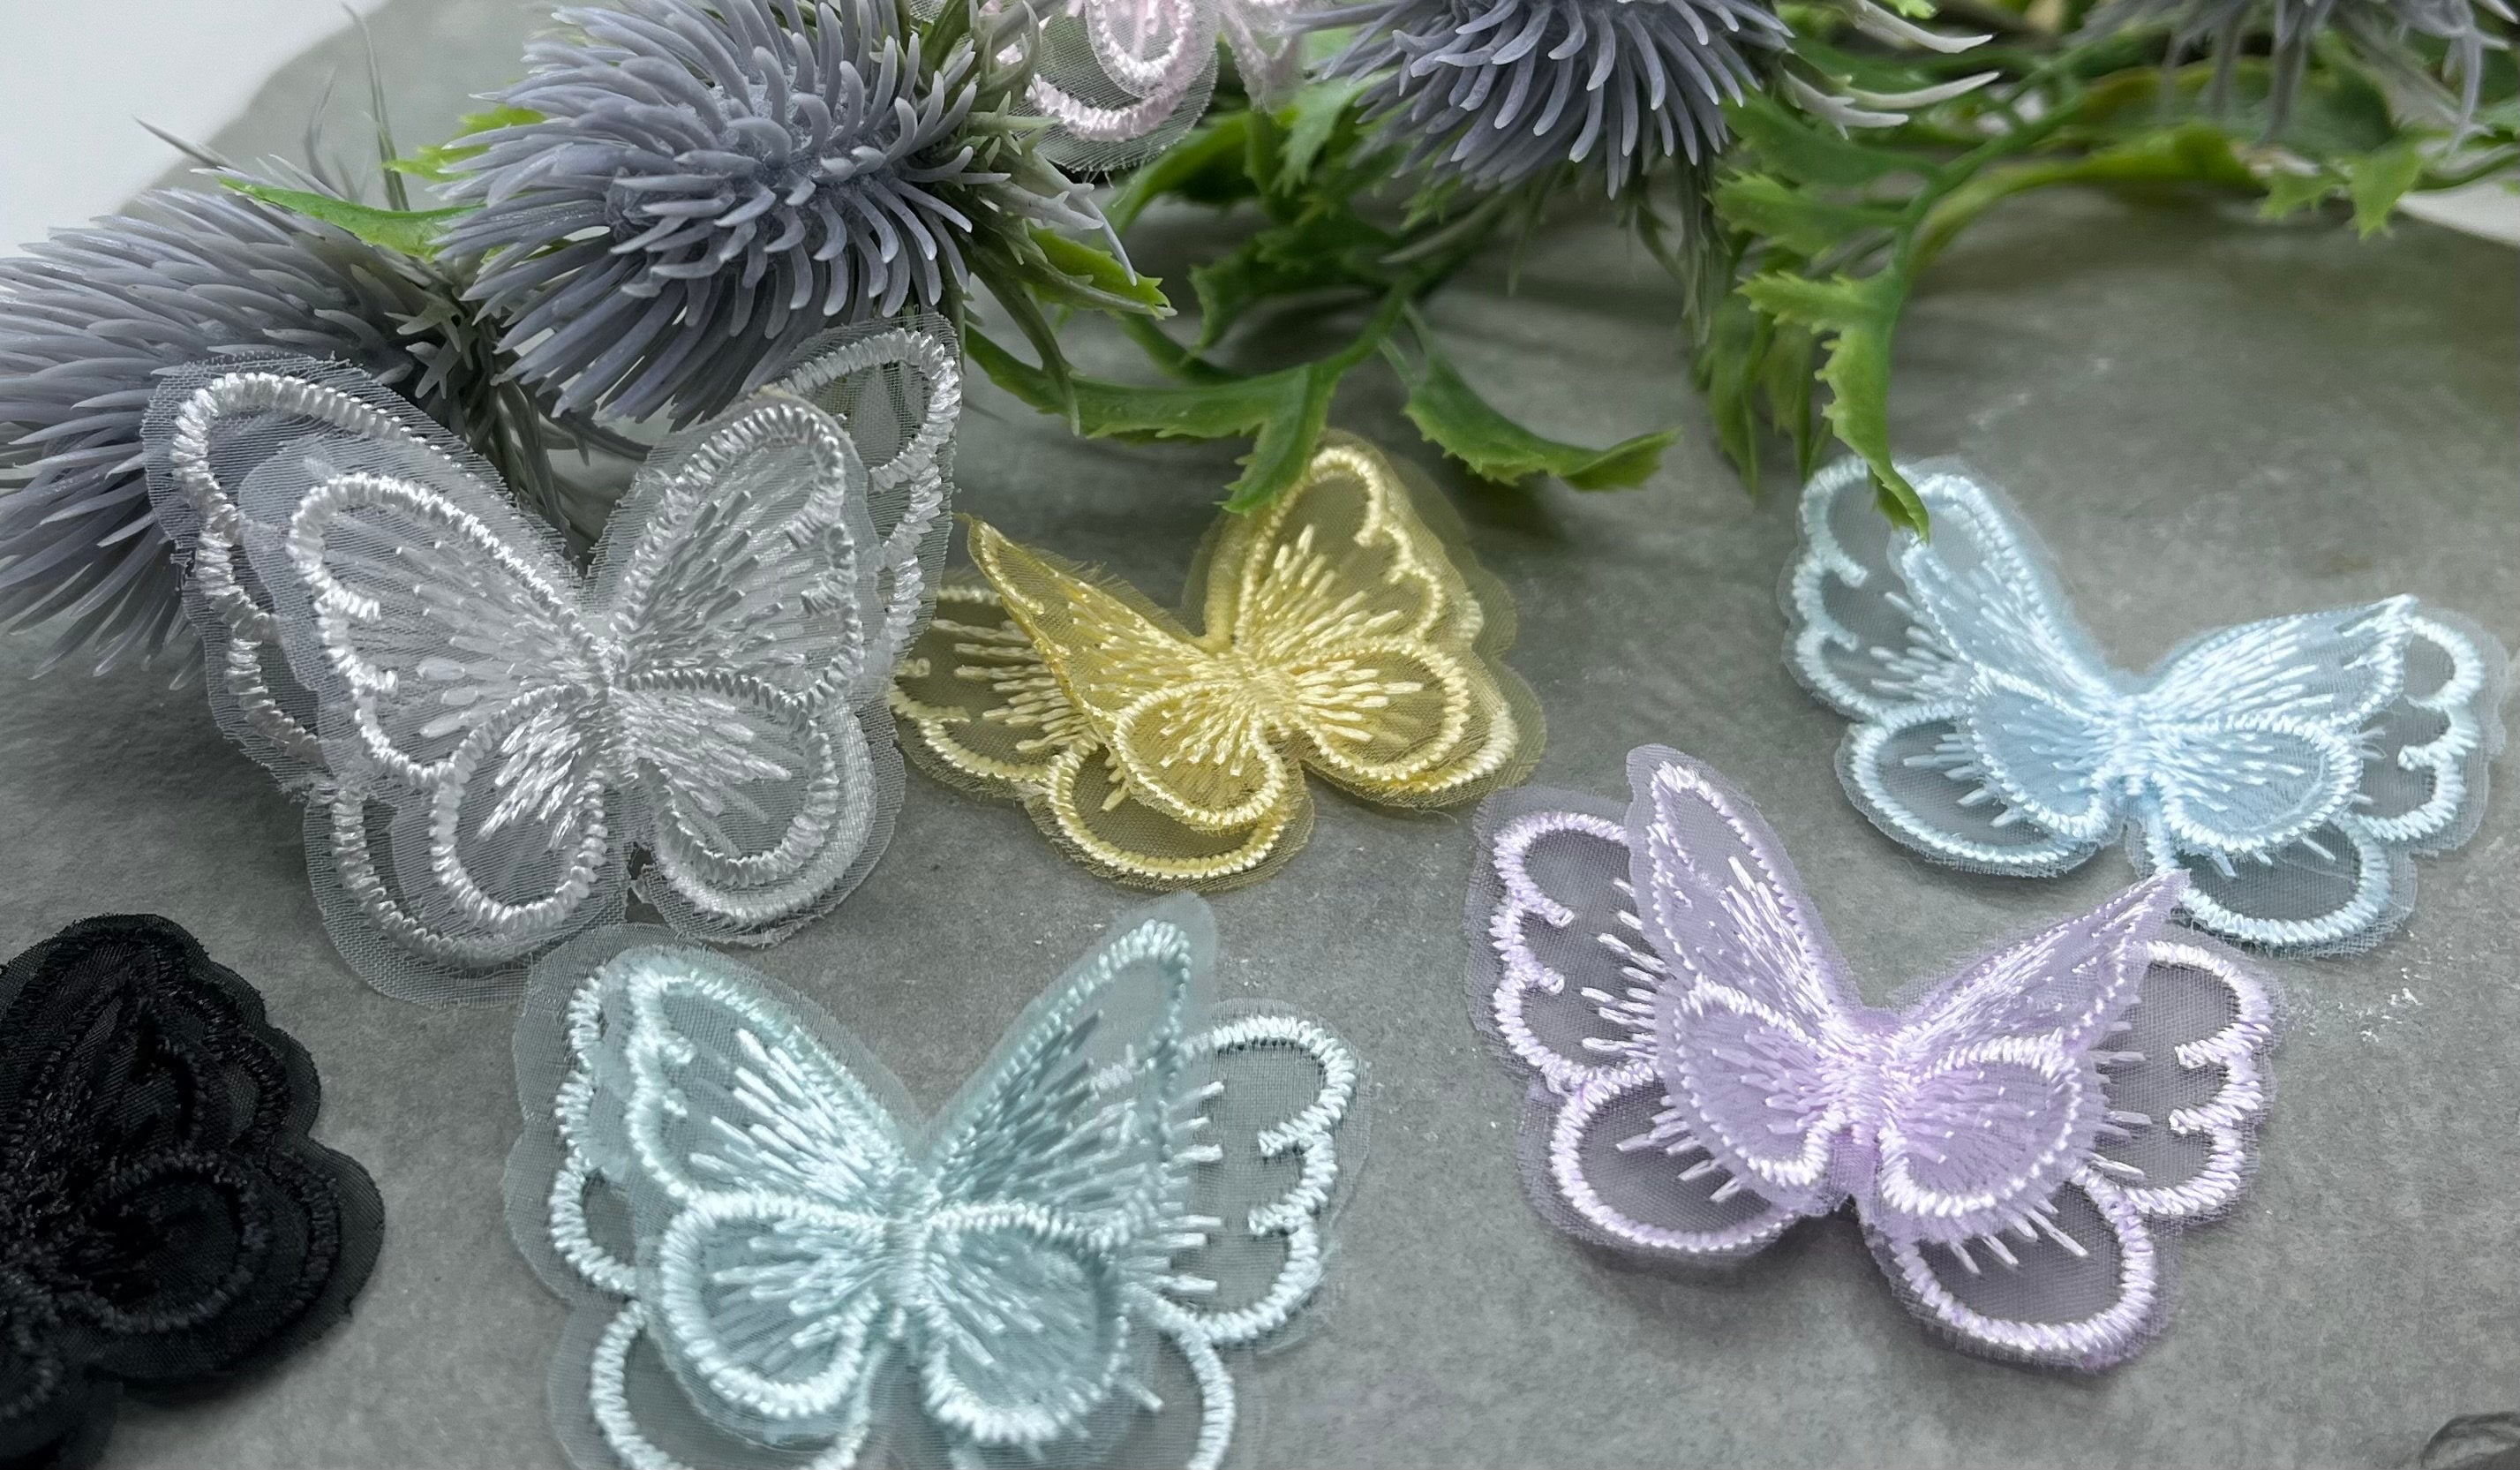 Embroidery Diy Butterfly Sew On Patch Badge Embroidered Butterfly Fabric  Applique From Cat11cat, $20.11